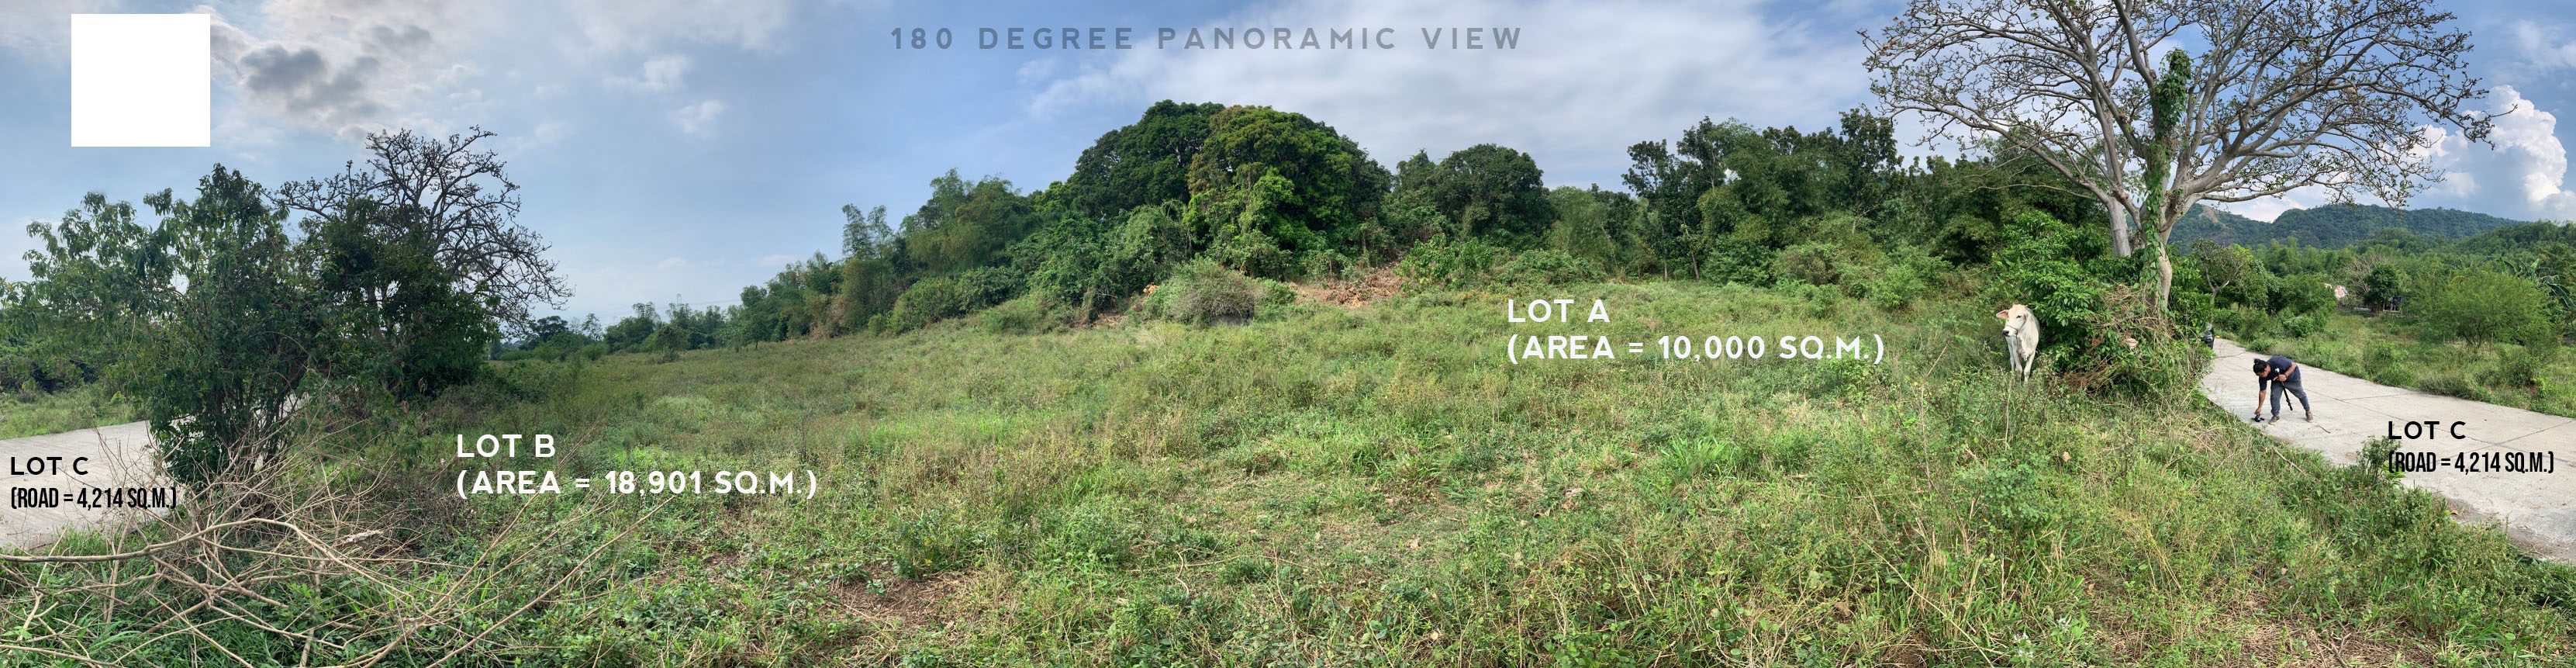 Agricultural land for sale in Pililla, Rizal, Quisao